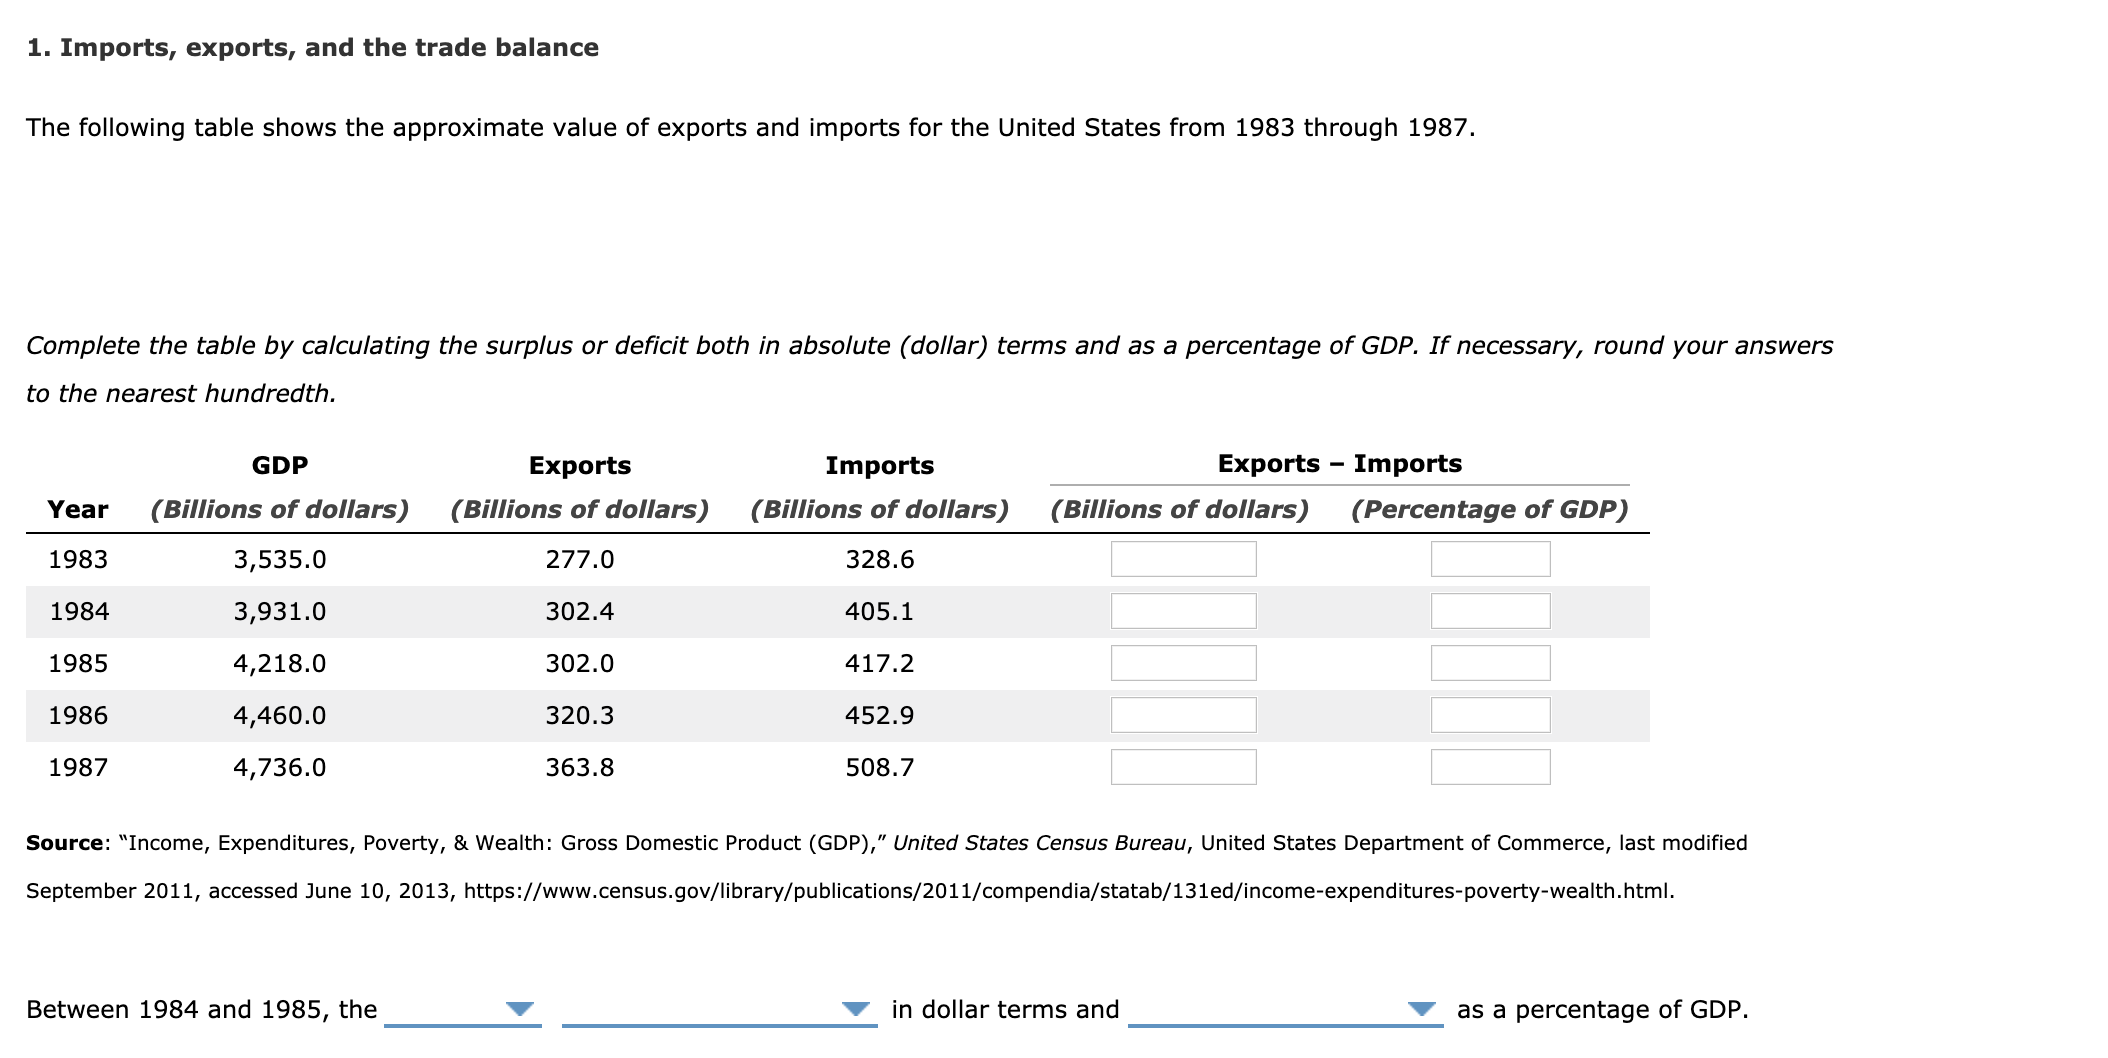 1. Imports, exports, and the trade balance
The following table shows the approximate value of exports and imports for the United States from 1983 through 1987.
Complete the table by calculating the surplus or deficit both in absolute (dollar) terms and as a percentage of GDP. If necessary, round your answers
to the nearest hundredth.
GDP
Exports
Imports
Exports - Imports
Year
(Billions of dollars)
(Billions of dollars)
(Billions of dollars)
(Billions of dollars)
(Percentage of GDP)
1983
3,535.0
277.0
328.6
1984
3,931.0
302.4
405.1
1985
4,218.0
302.0
417.2
1986
4,460.0
320.3
452.9
1987
4,736.0
363.8
508.7
Source: "Income, Expenditures, Poverty, & Wealth: Gross Domestic Product (GDP)," United States Census Bureau, United States Department of Commerce, last modified
September 2011, accessed June 10, 2013, https://www.census.gov/library/publications/2011/compendia/statab/131ed/income-expenditures-poverty-wealth.html.
Between 1984 and 1985, the
in dollar terms and
as a percentage of GDP.
